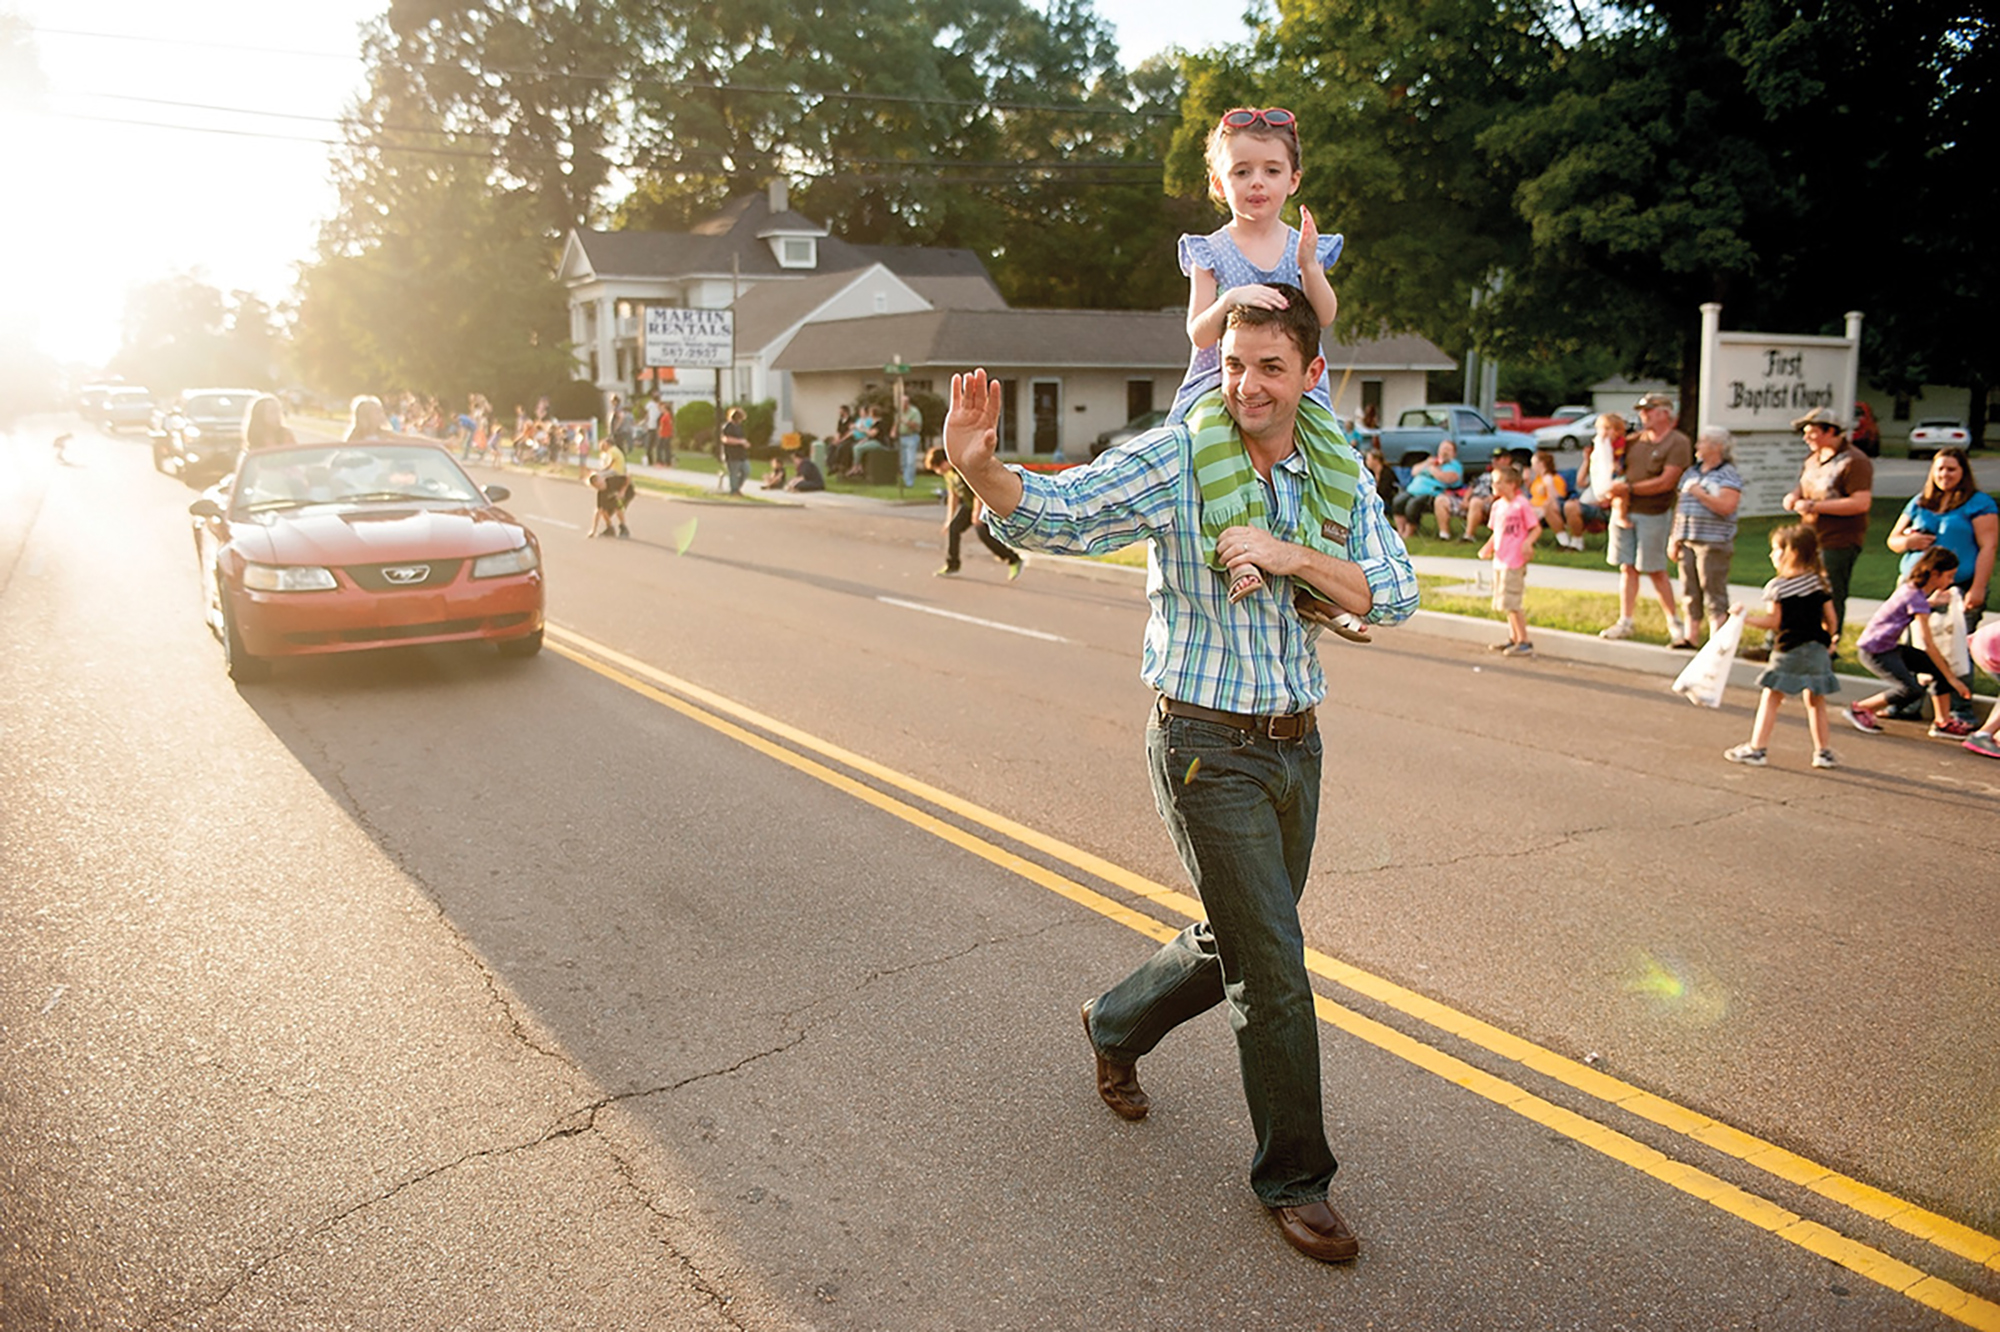 Jake Bynum and daughter Ella in the Tennsee Soybean Festival parade in 2014